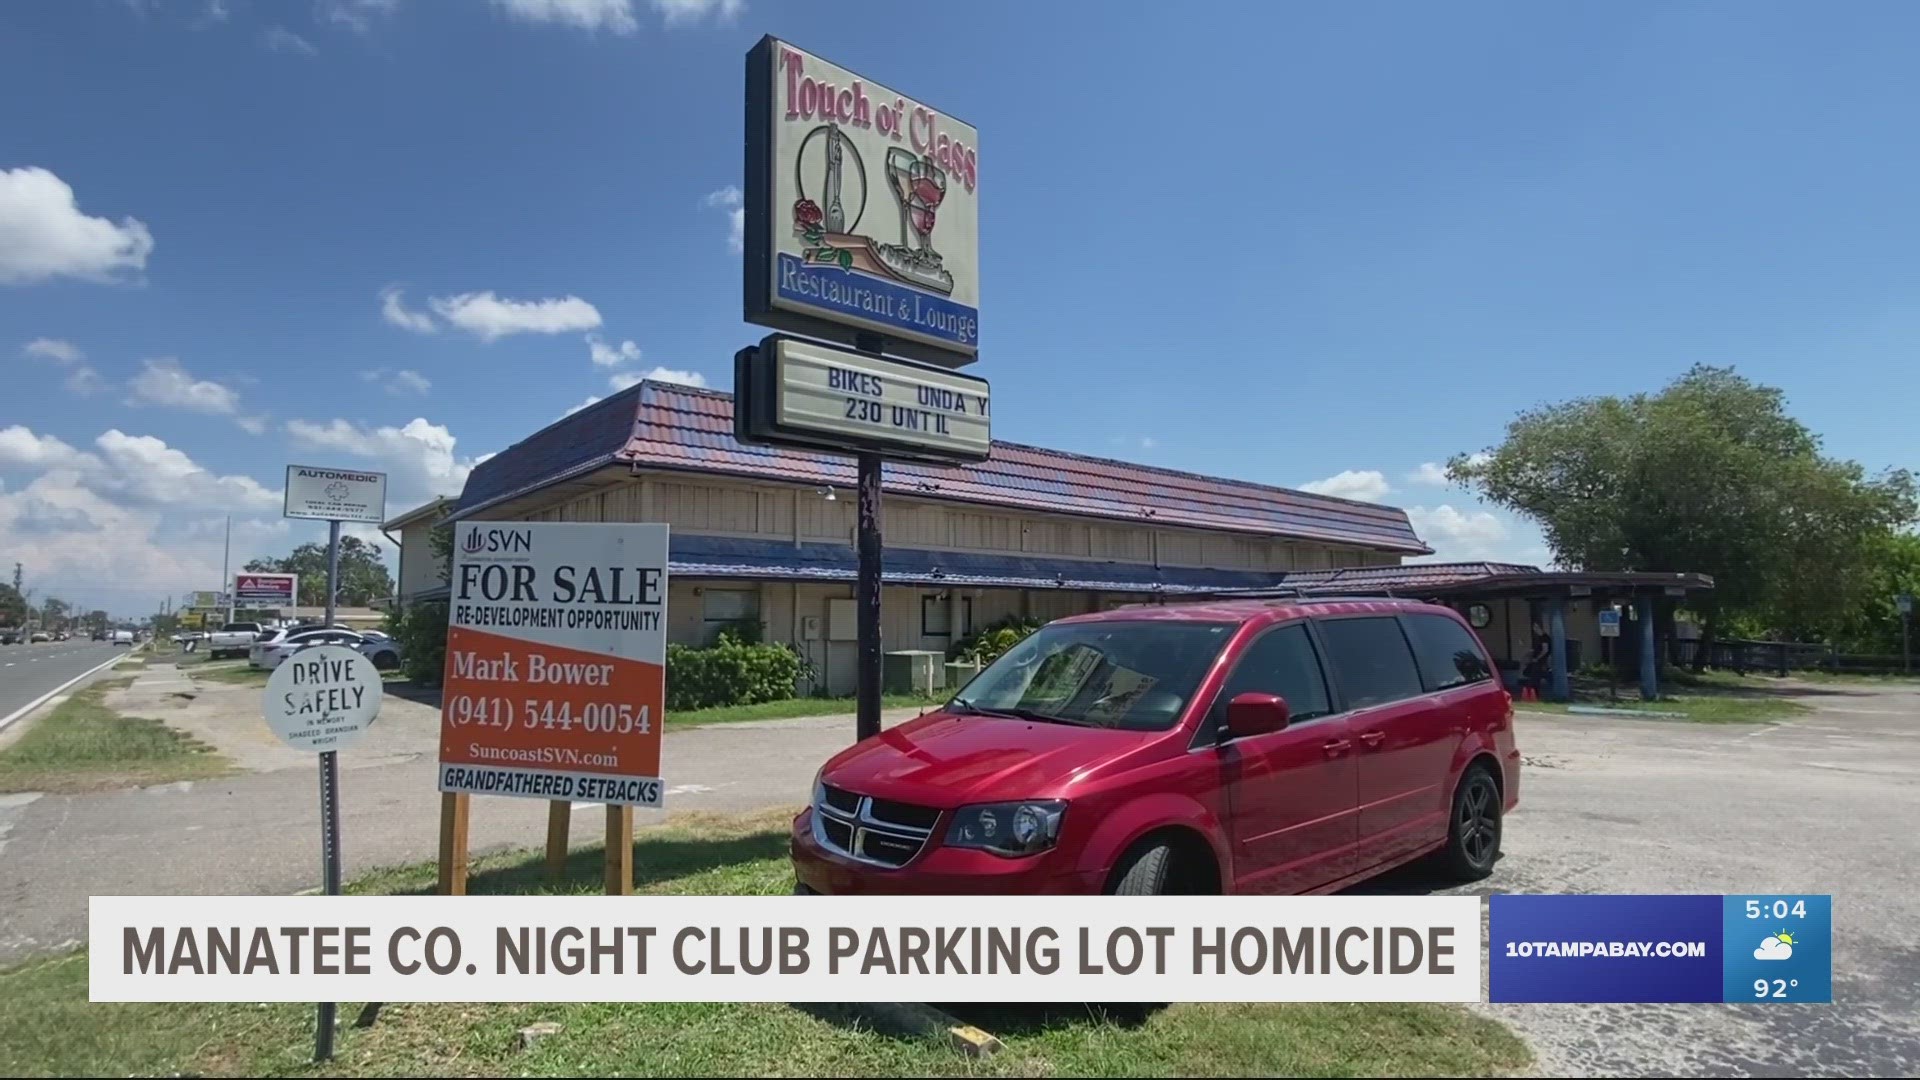 The man was found by deputies around 2:30 a.m. on Sunday in the parking lot of the Gold Rush Arcade, an area used for overflow parking for Touch of Class Night Club.